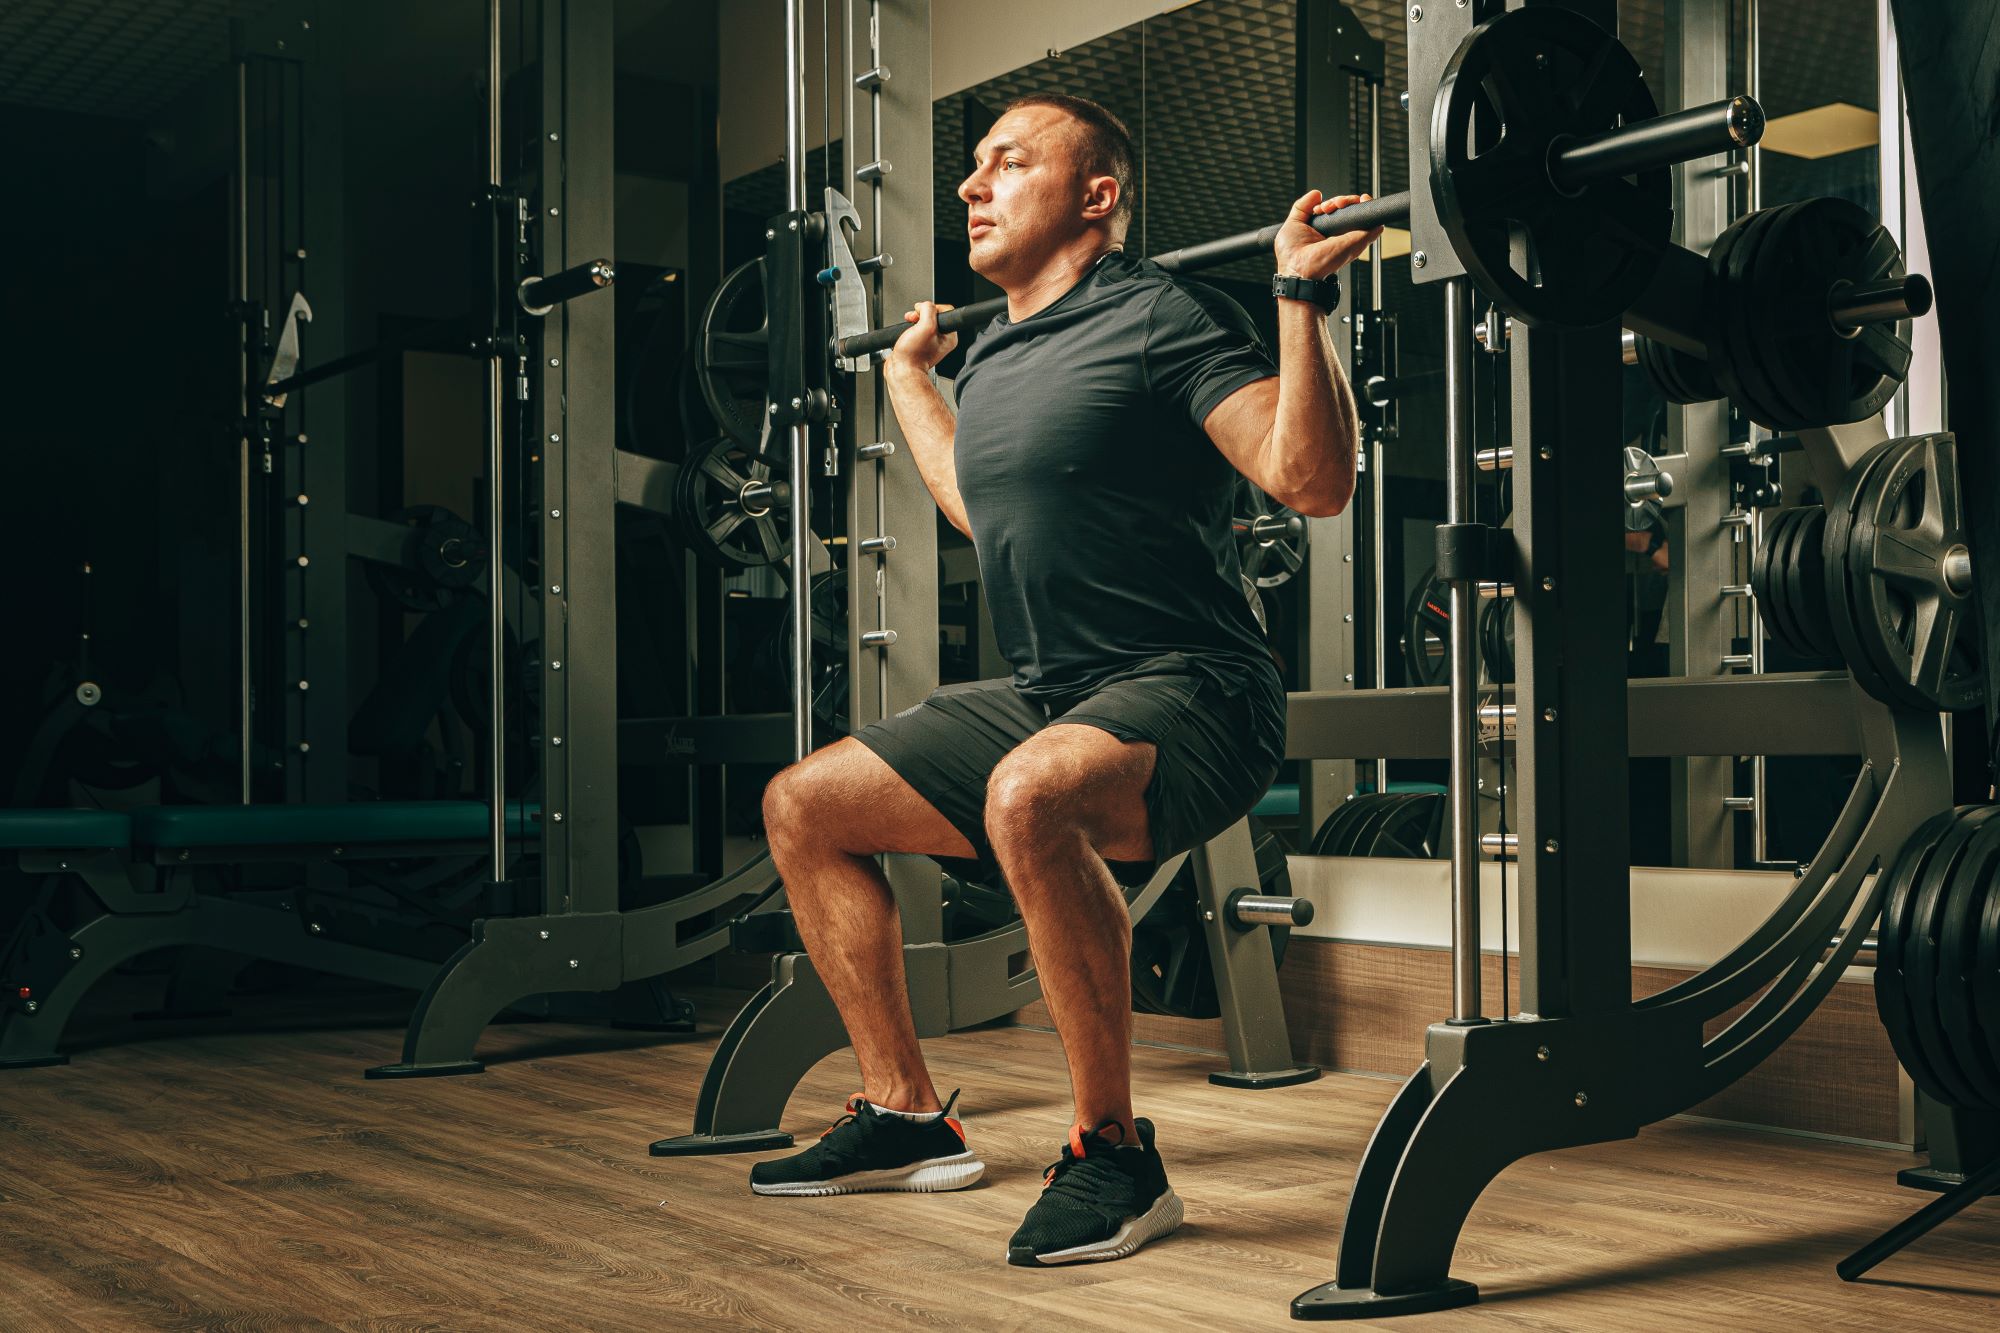 Front Squat Machine vs. Barbell Squats : Fitness Tips for a